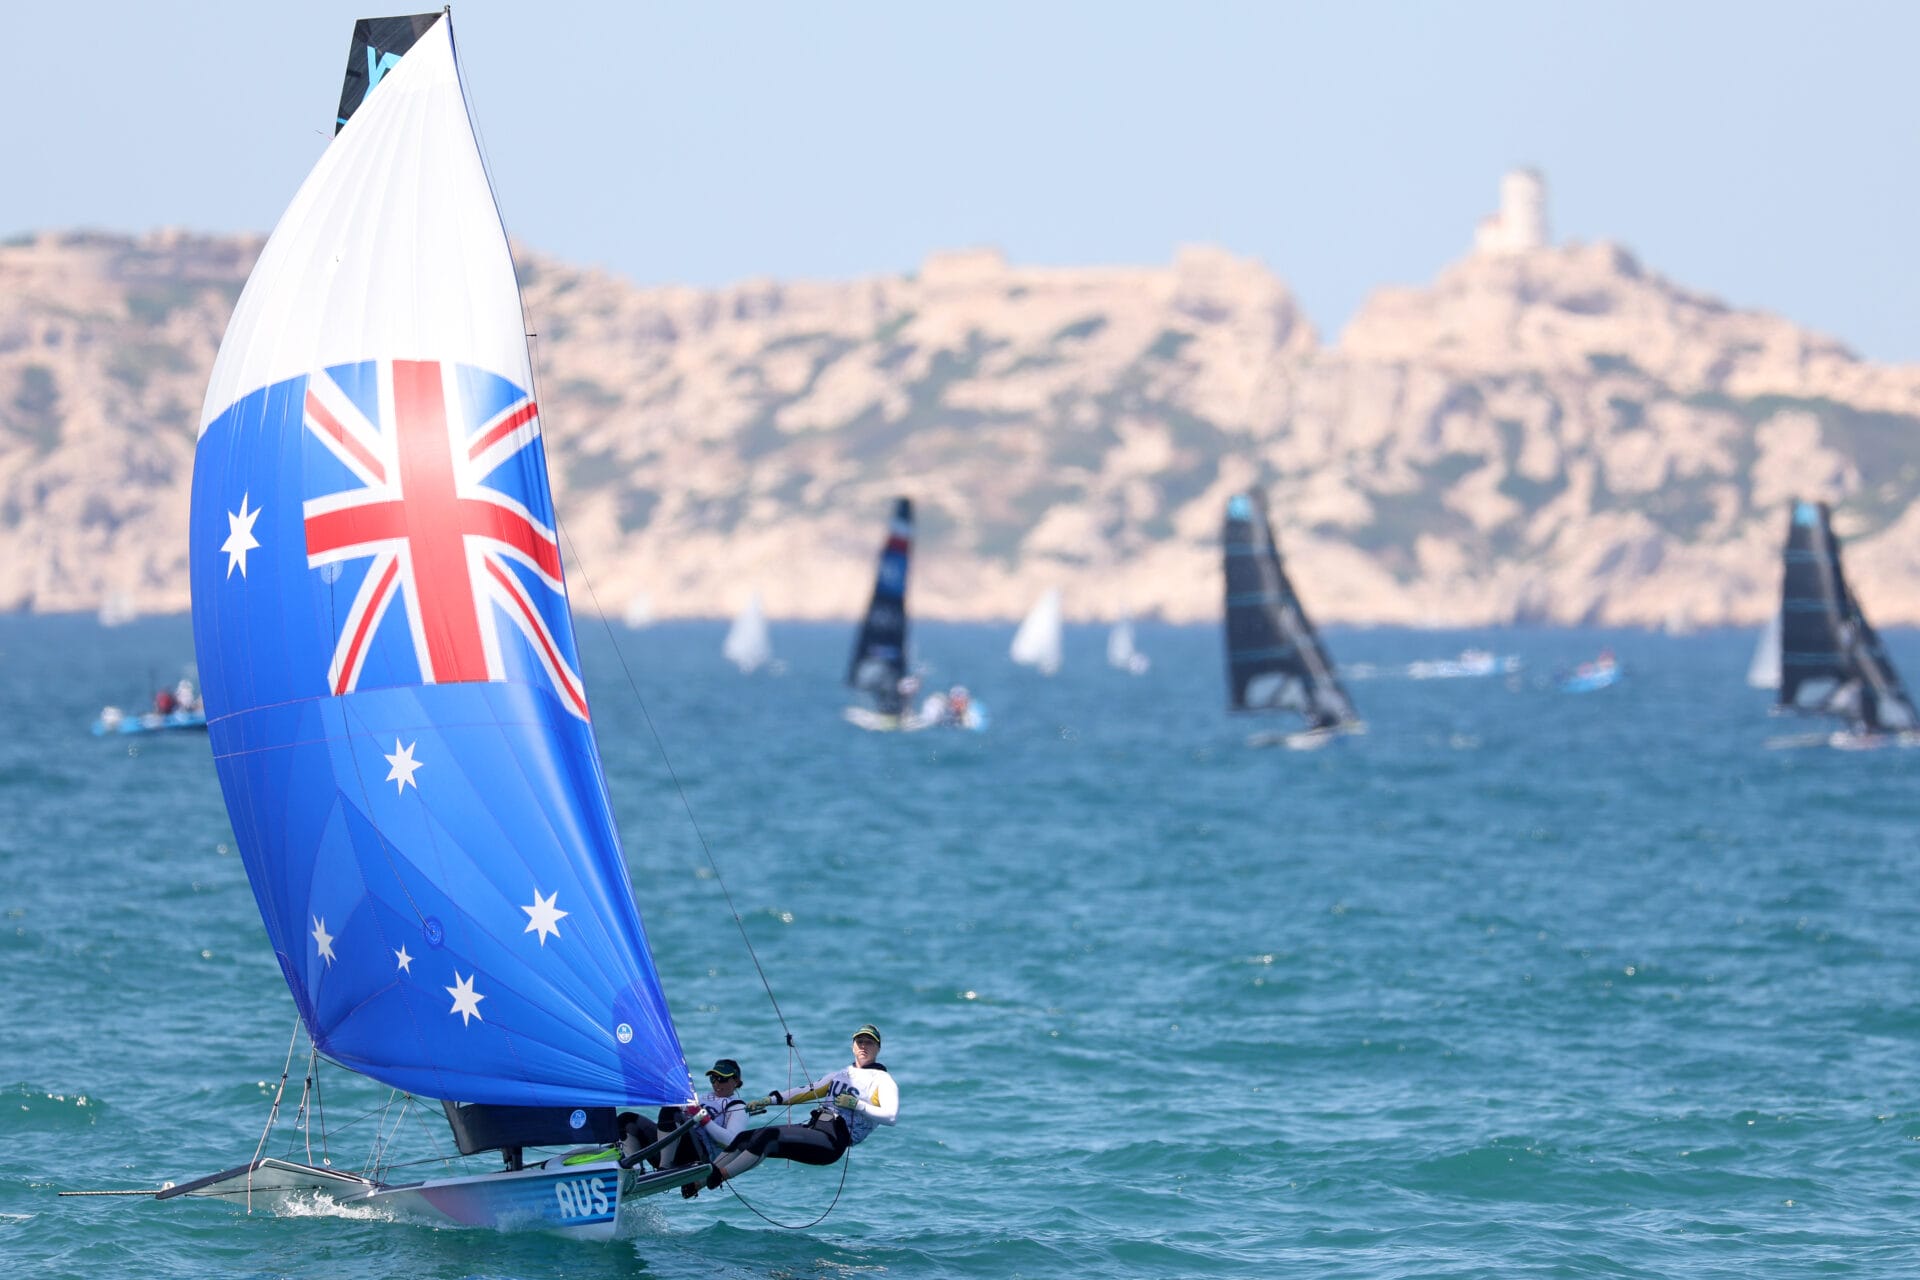 Jim Colley and Shaun Connor of Australia sail their Men's Skiff during a training session at the Marseille Marina on July 23, 2024 in Marseille, France. (Photo by Phil Walter/Getty Images)